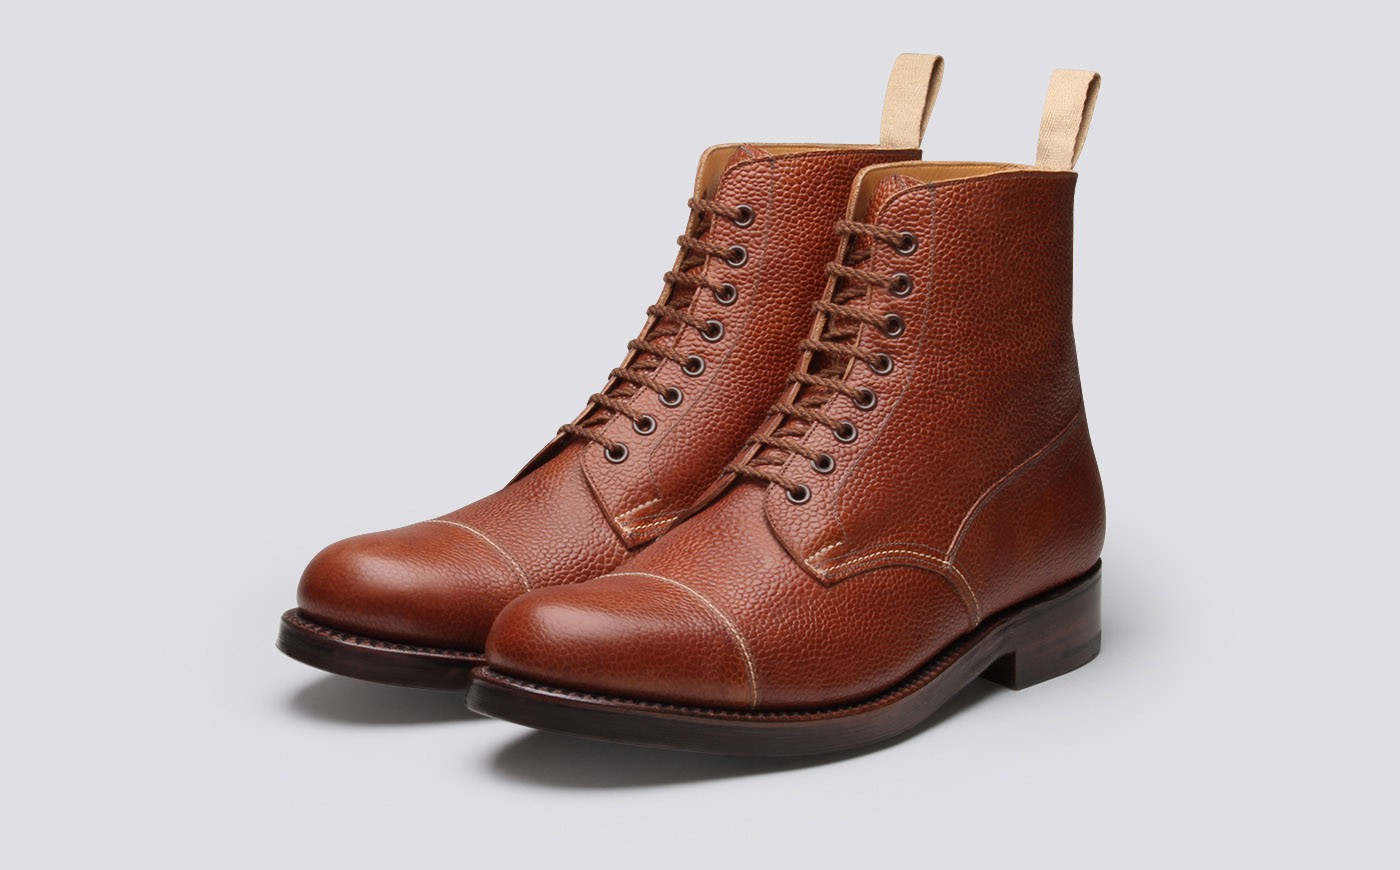 CHAD'S DRYGOODS: GRENSON SHOEMAKERS FOR 150 YEARS